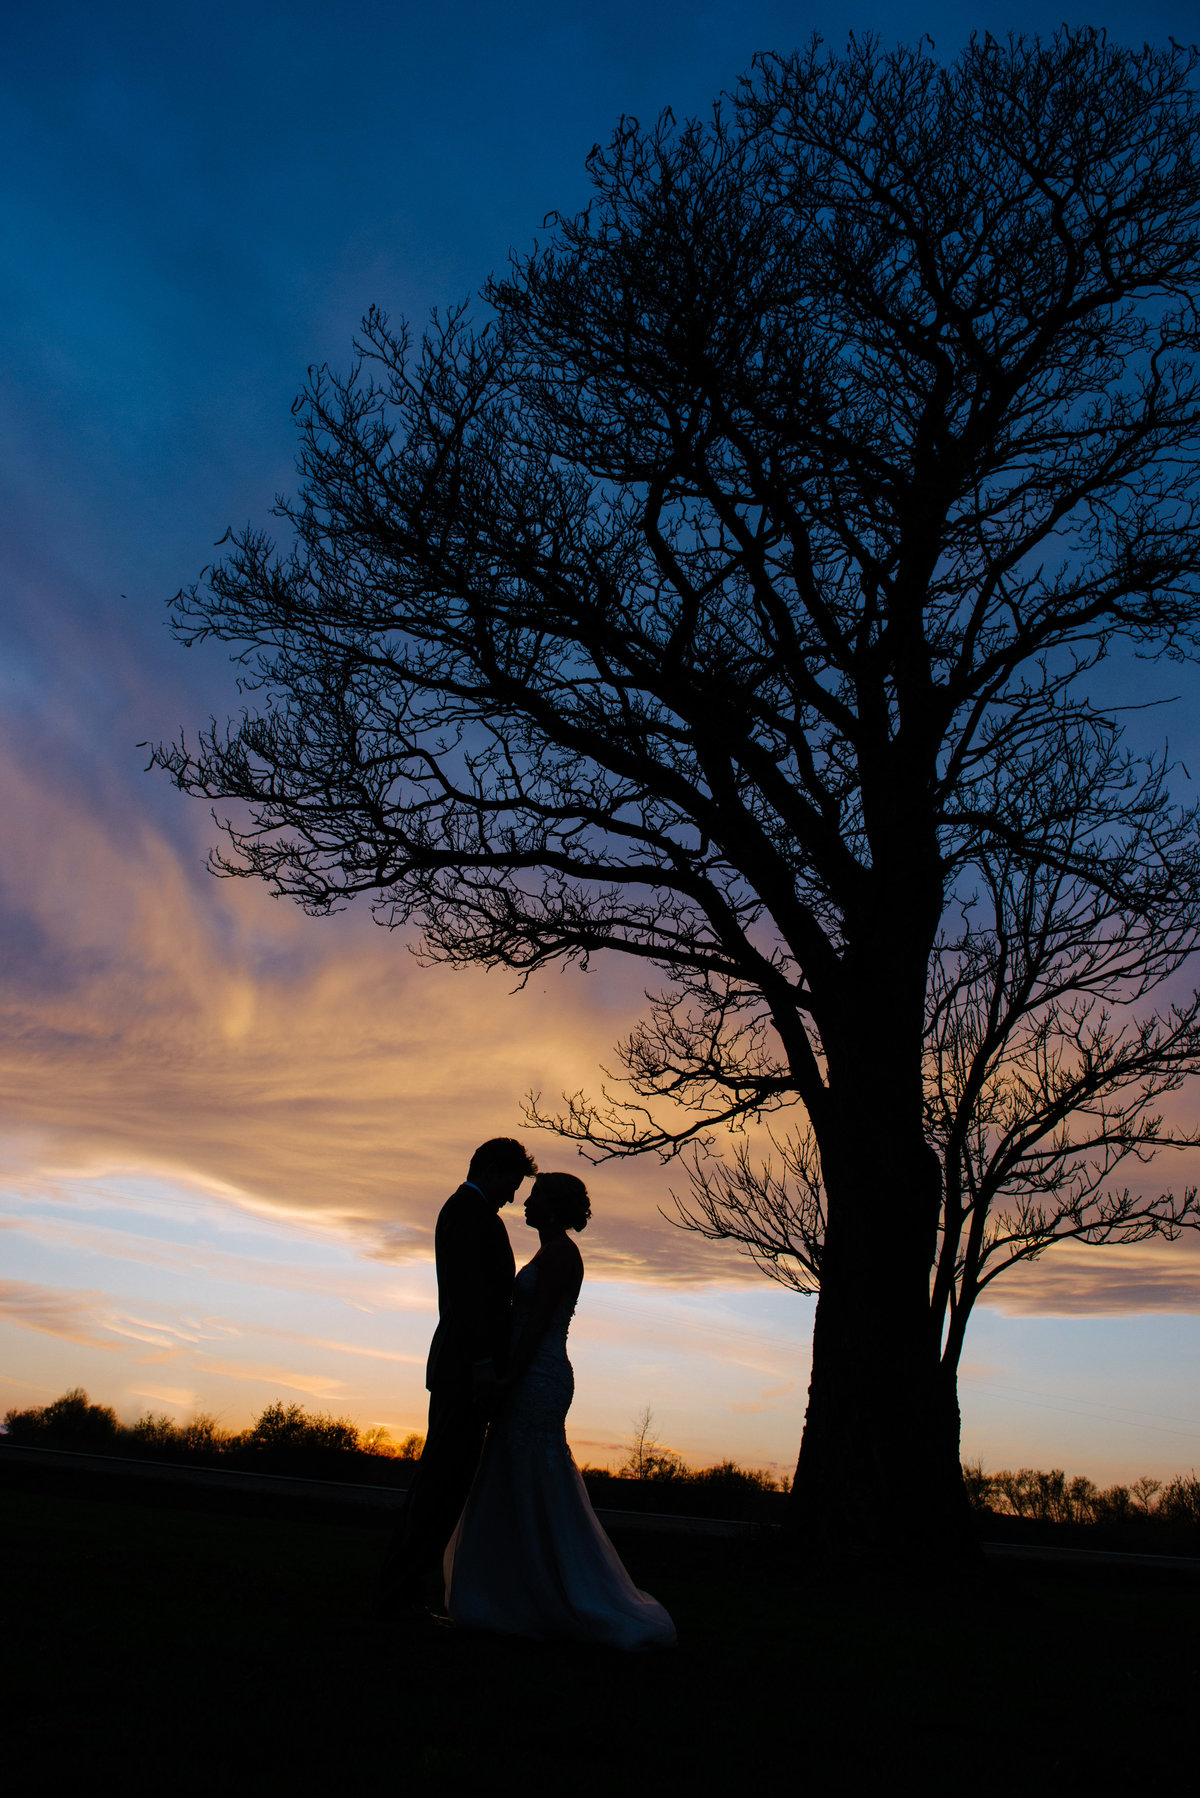 Bride and Groom Sunset Silhouette at Barn at Harvest Moon Pond